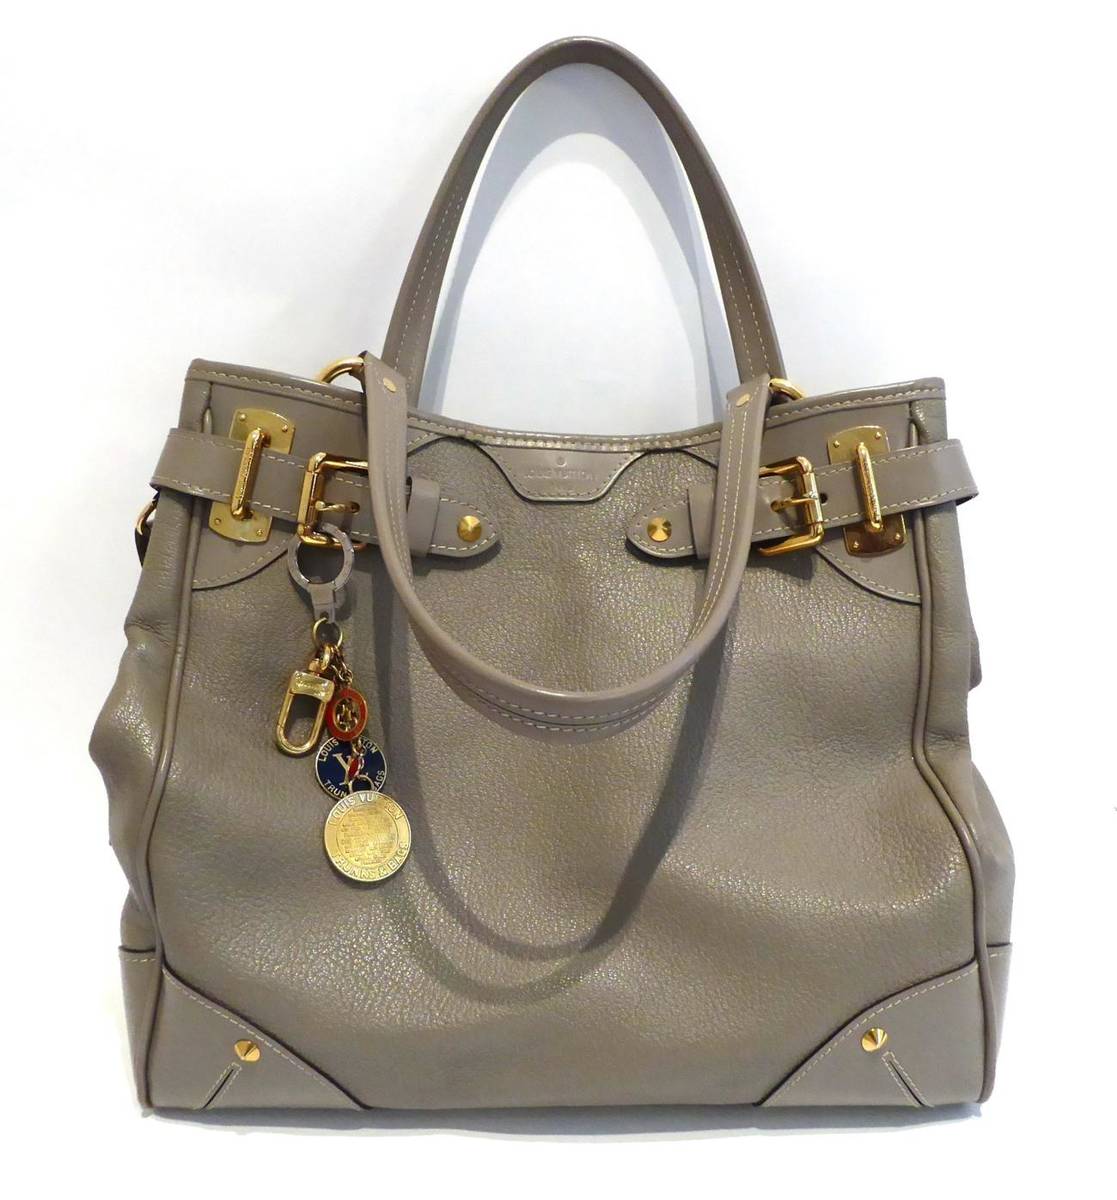 Lot 2144 - Louis Vuitton Grey Leather Handbag, with gilt metal fittings, attached LV bag charm and luggage tag